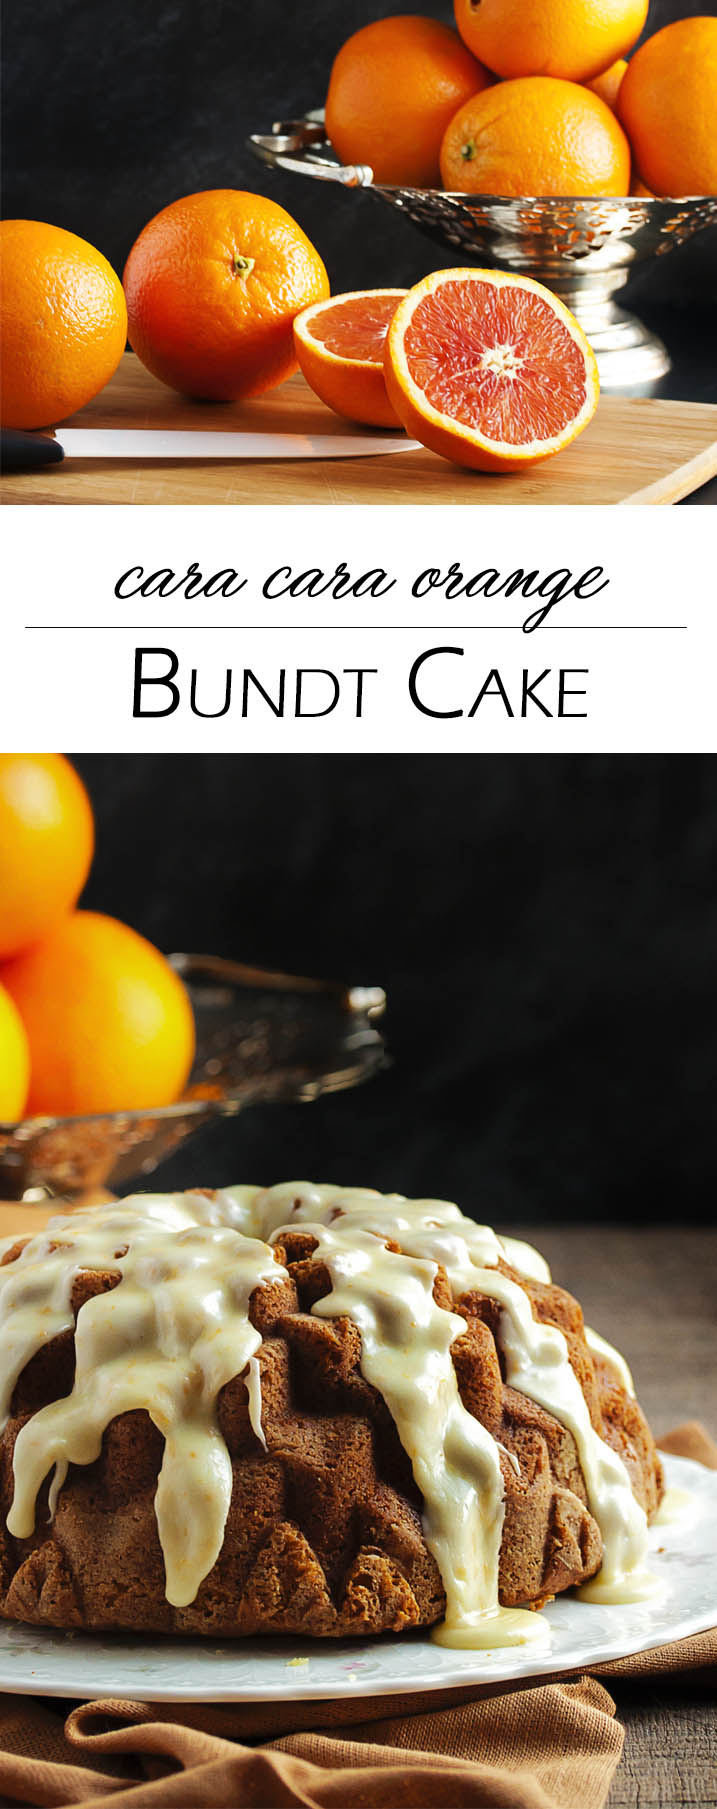 Cara Cara Orange Bundt Cake - This moist and rich bundt cake has a fine crumb and loads of orange flavor! One taste, and no matter where you are or what the season, it's summer again. | justalittlebitofbacon.com